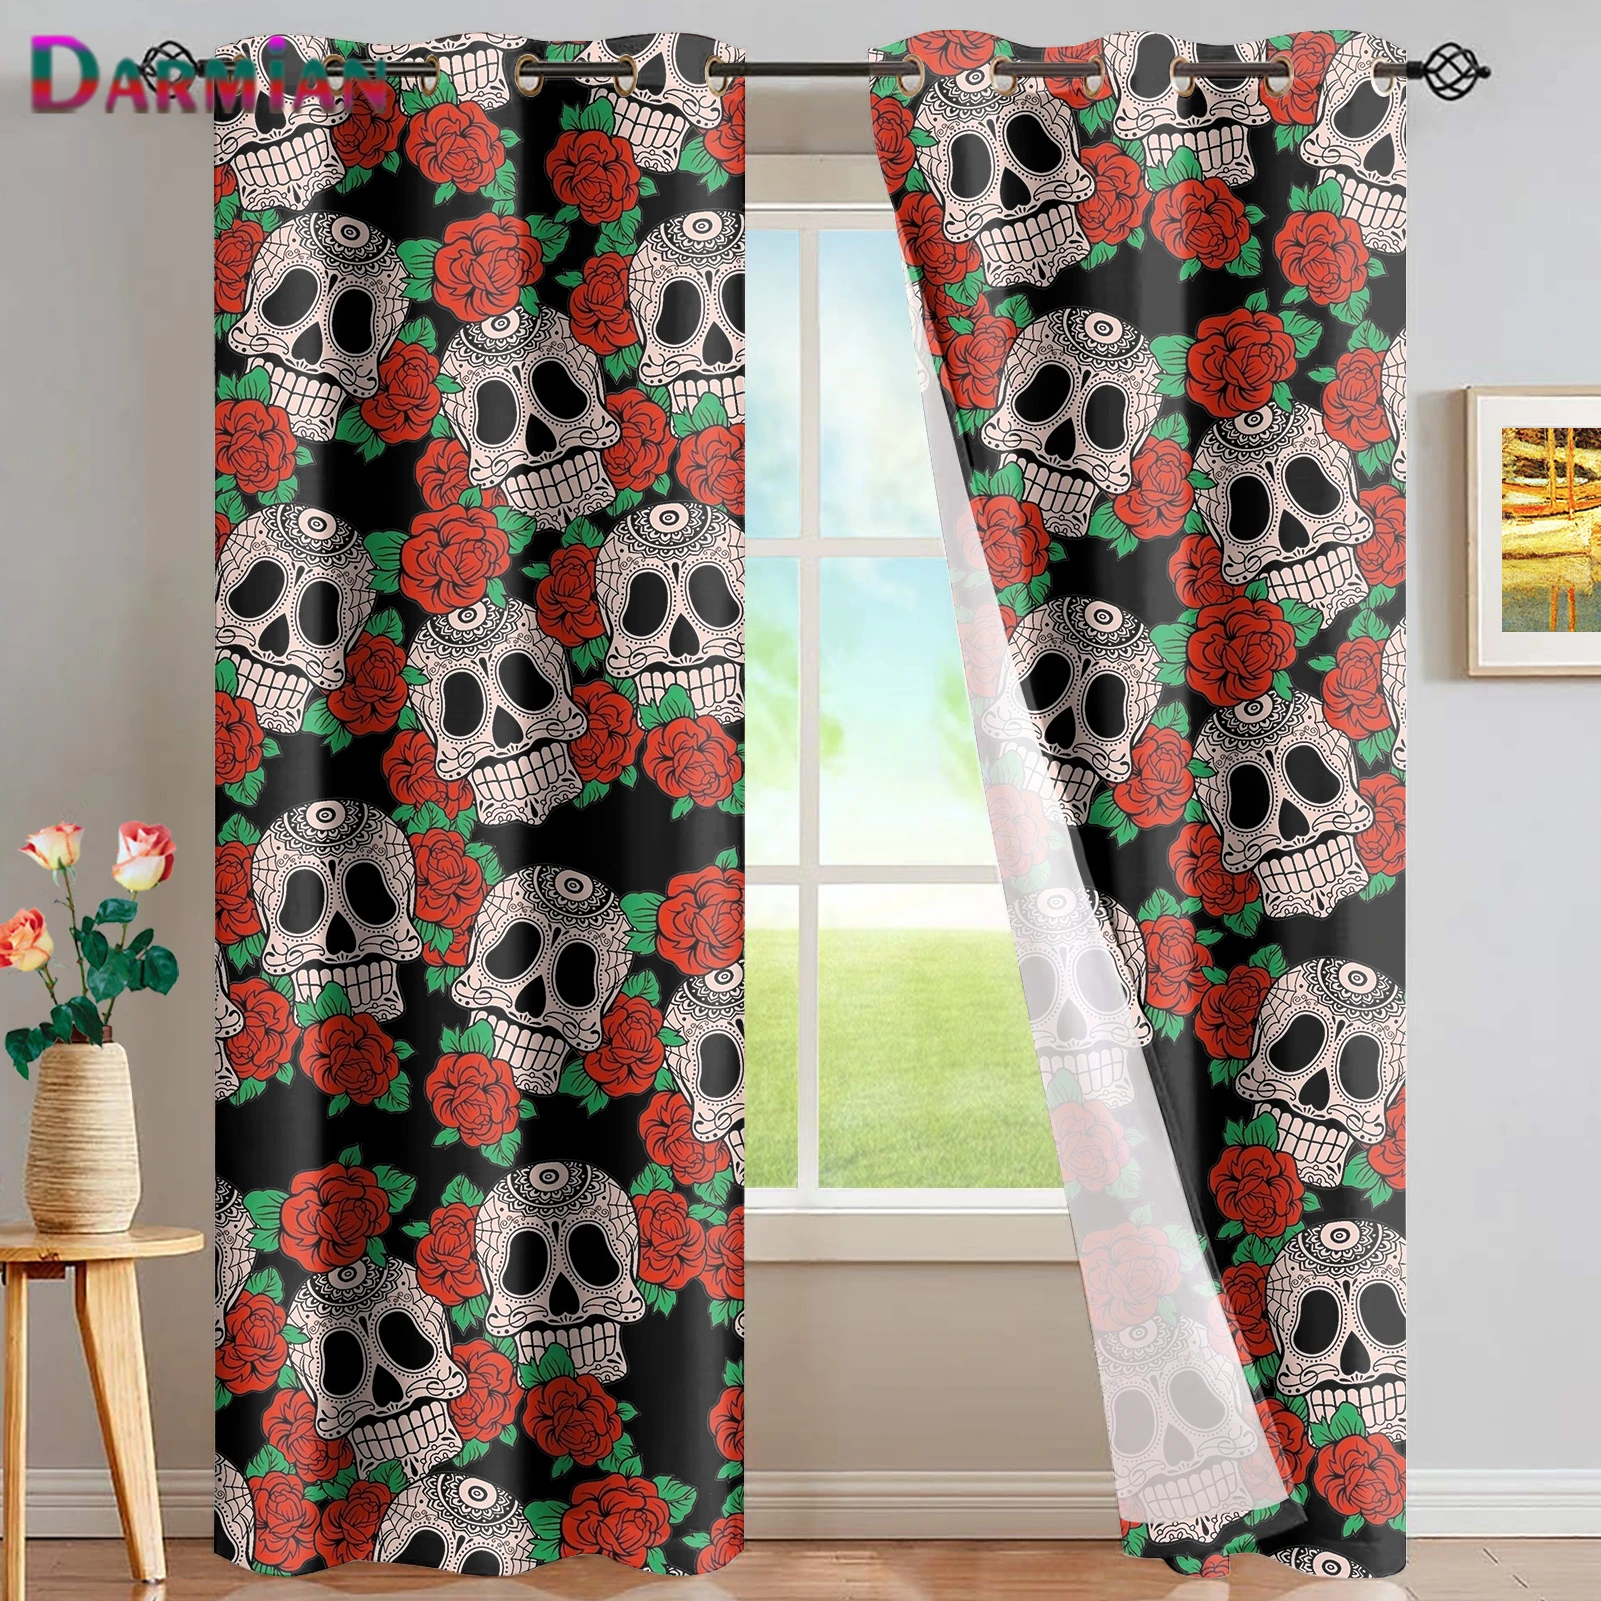 

DARMIAN Fashion Gothic Skulls Pattern Window Blackout Curtains for Home Decoration Thermal Insualted Window Draperies Curtain